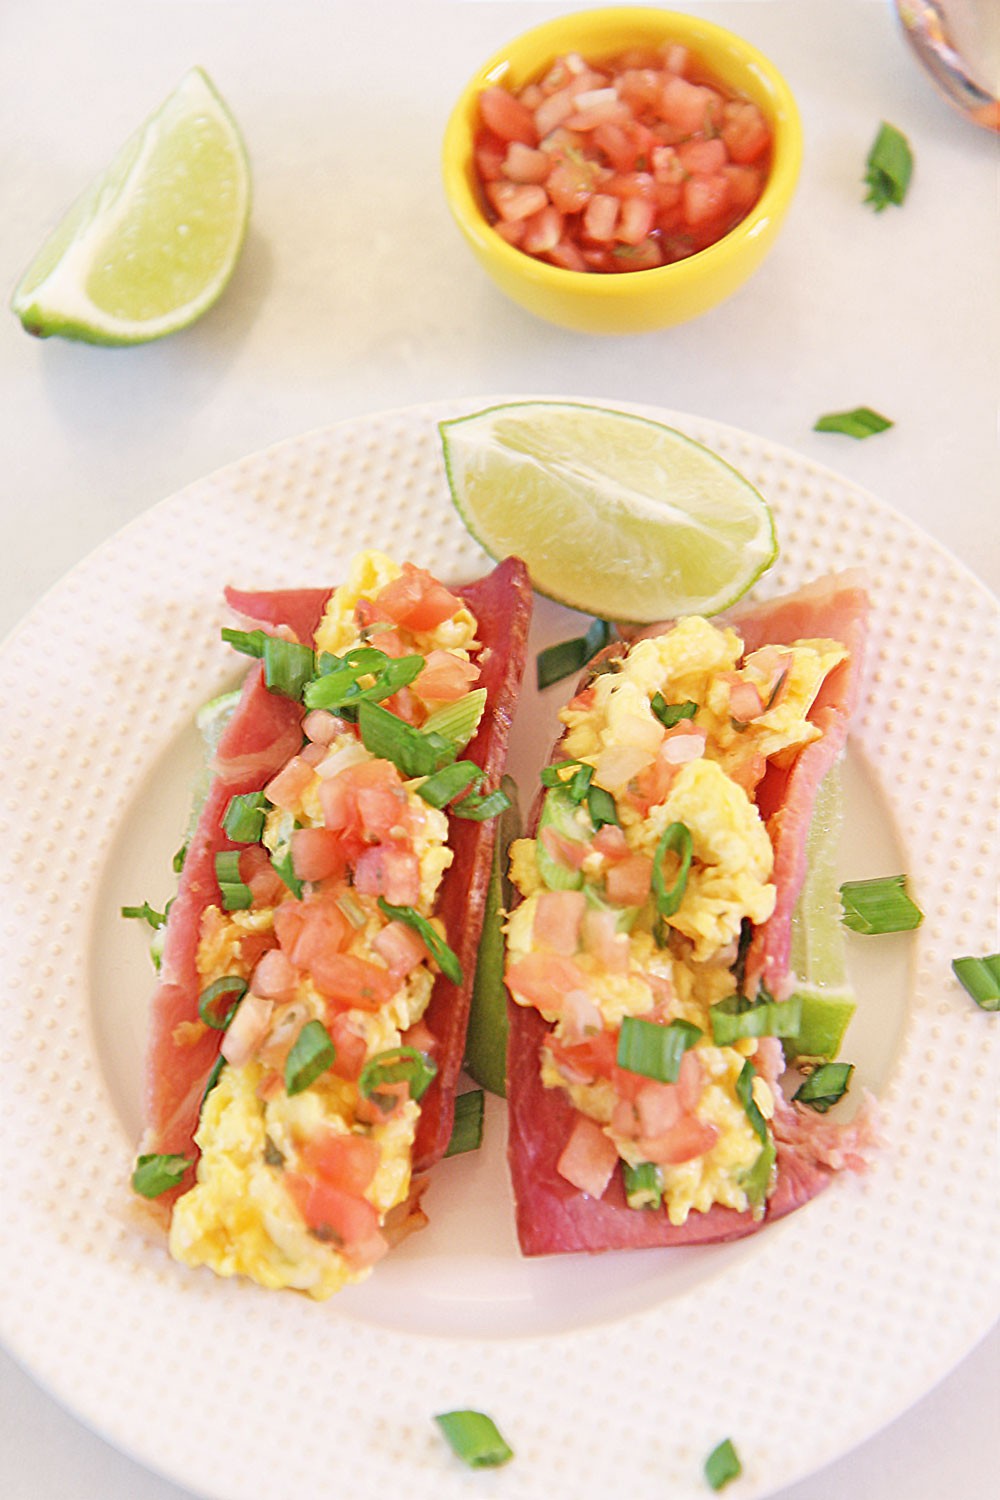 Breakfast Taco With Ham Shell Recipe. Easy gluten free and keto friendly brunch recipe. This recipe includes eggs, Greek yogurt, ham and other breakfast fun. Happy Cooking! www.ChopHappy.com #breakfasttacos #tacoTuesday